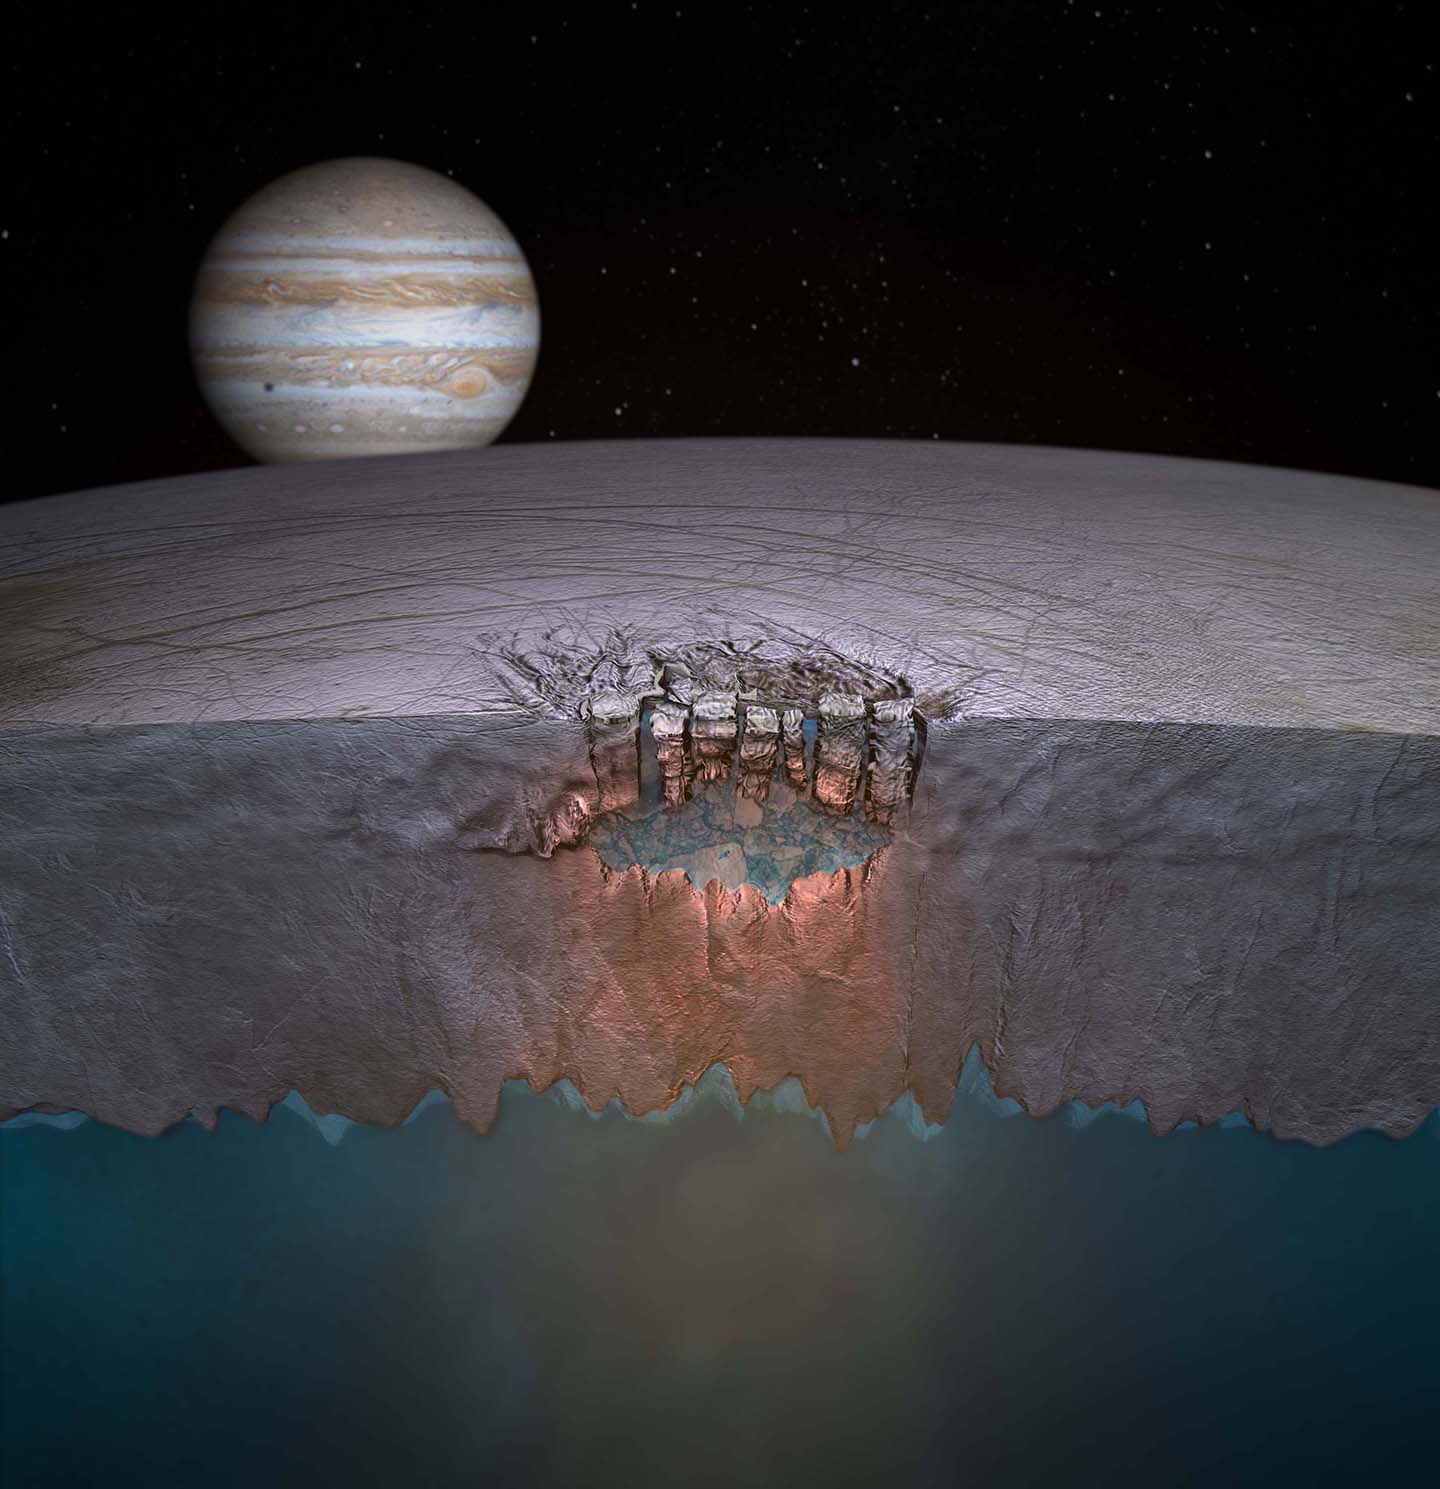 Artist's impression of the "Great Lake" on Jupiter's moon Europa